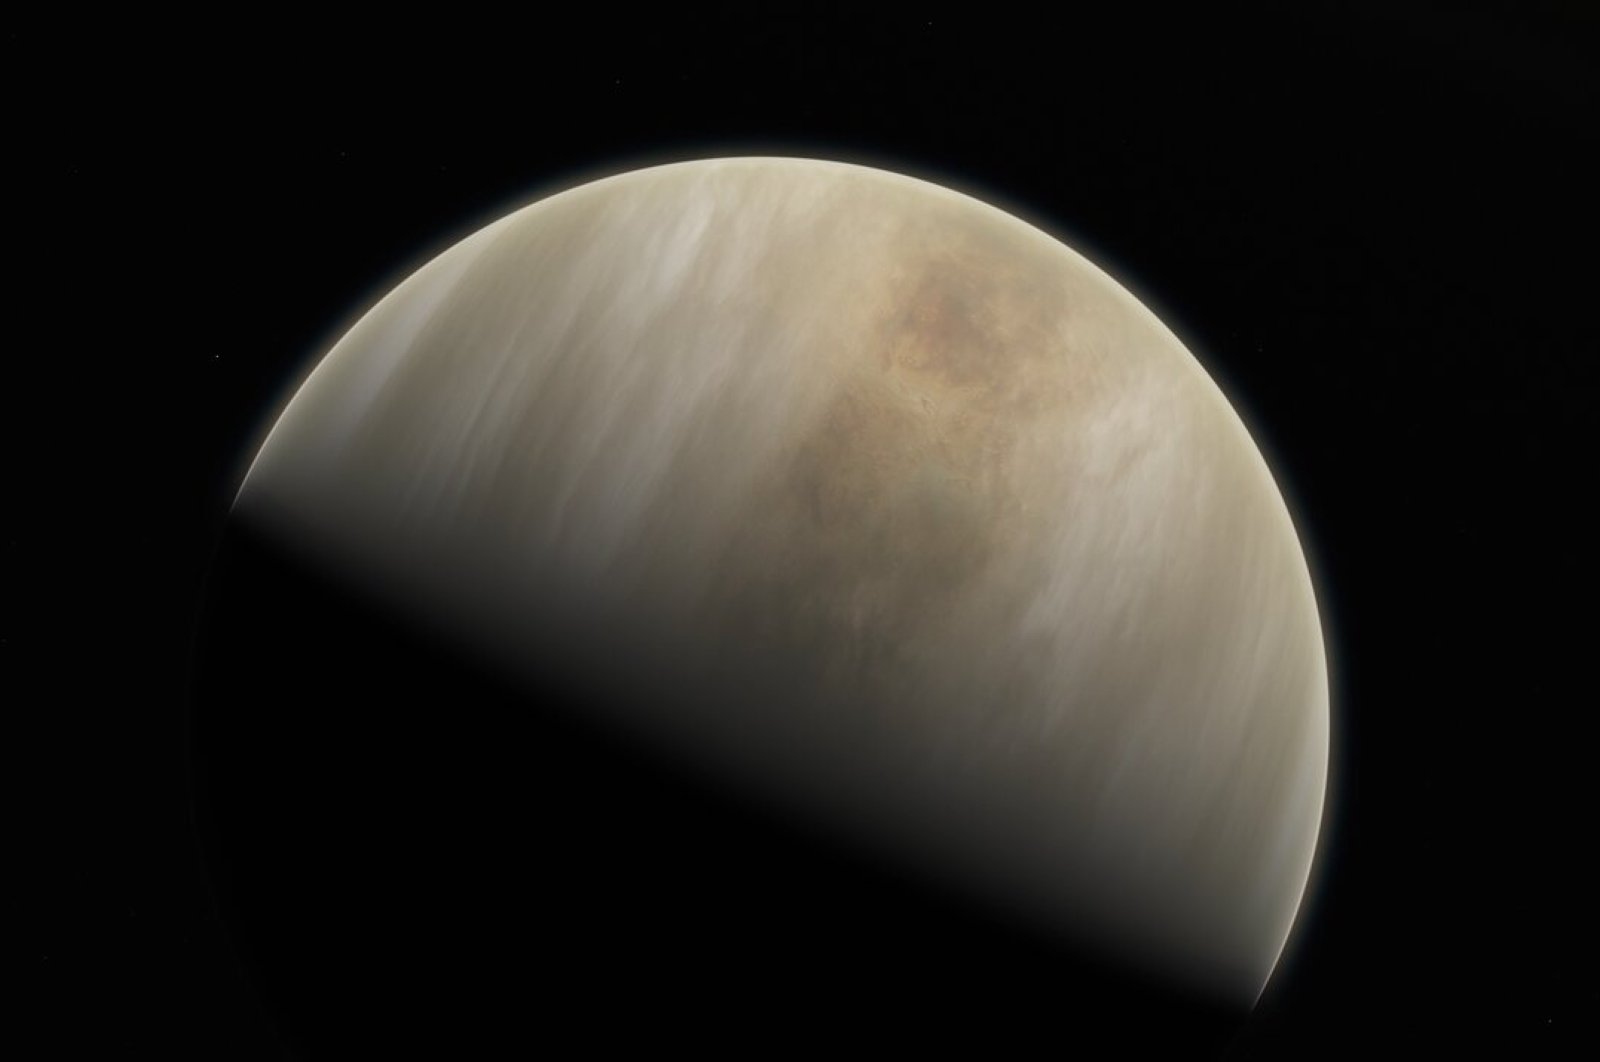 A handout photo made available by the European Southern Observatory shows an artistic impression of Solar System neighbor Venus, where scientists have confirmed the detection of phosphine molecules, as reported in a study released in the Nature Astronomy journal on September 14, 2020. (EPA/ESO/M. Kornmesser & NASA/JPL/Caltech / HANDOUT)